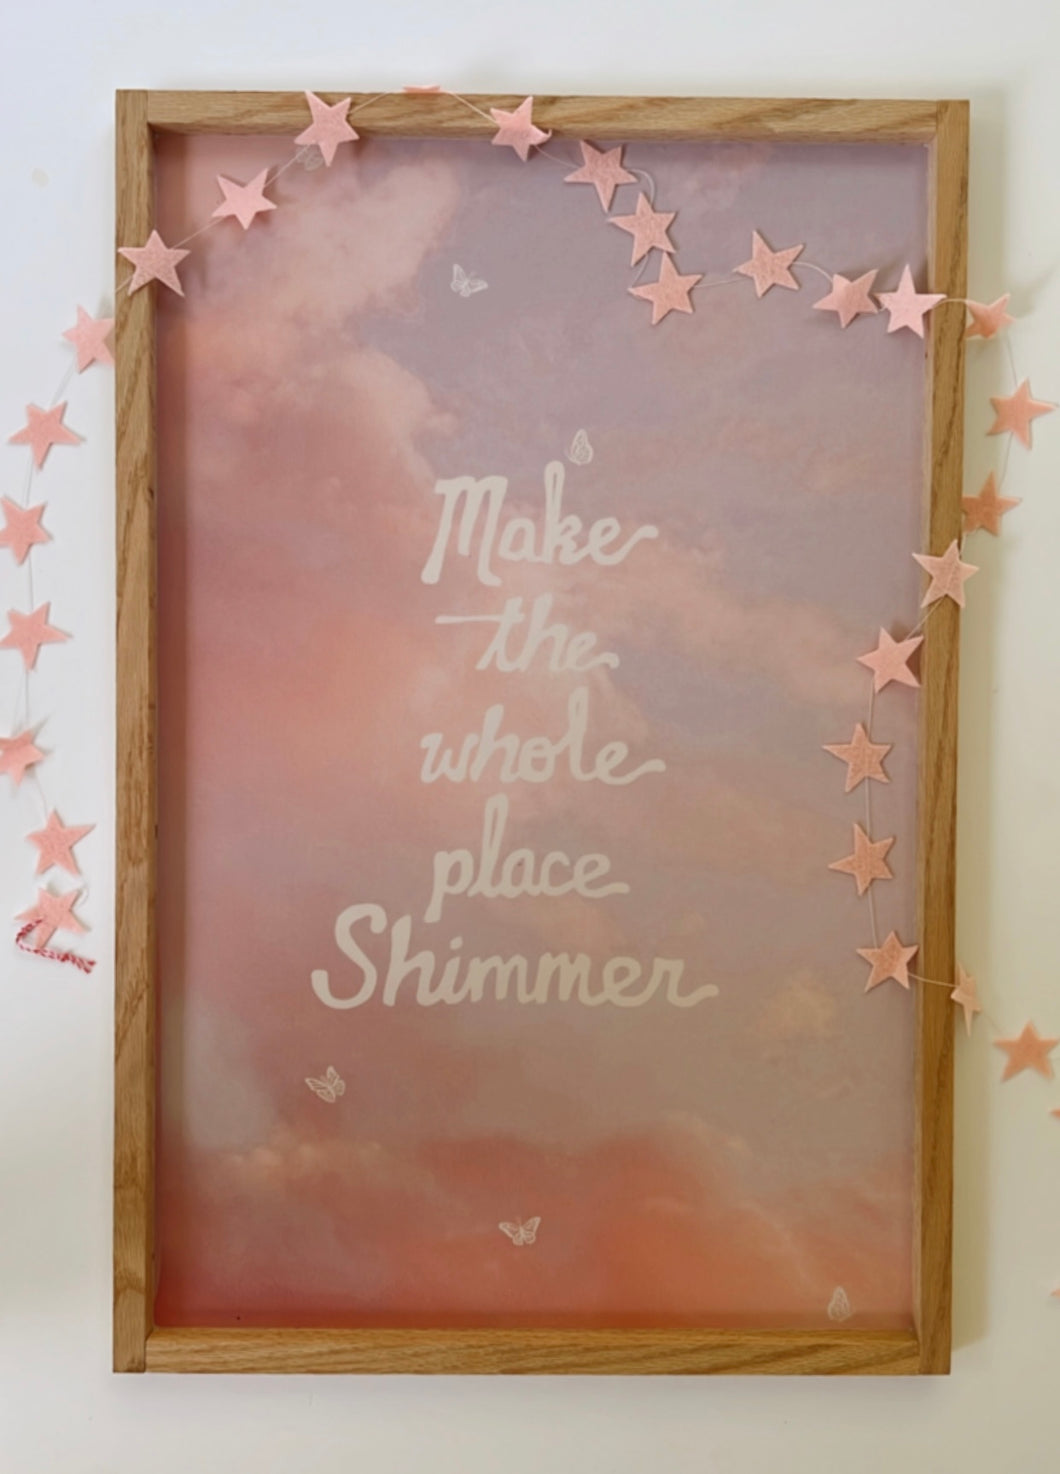 Make the whole place shimmer